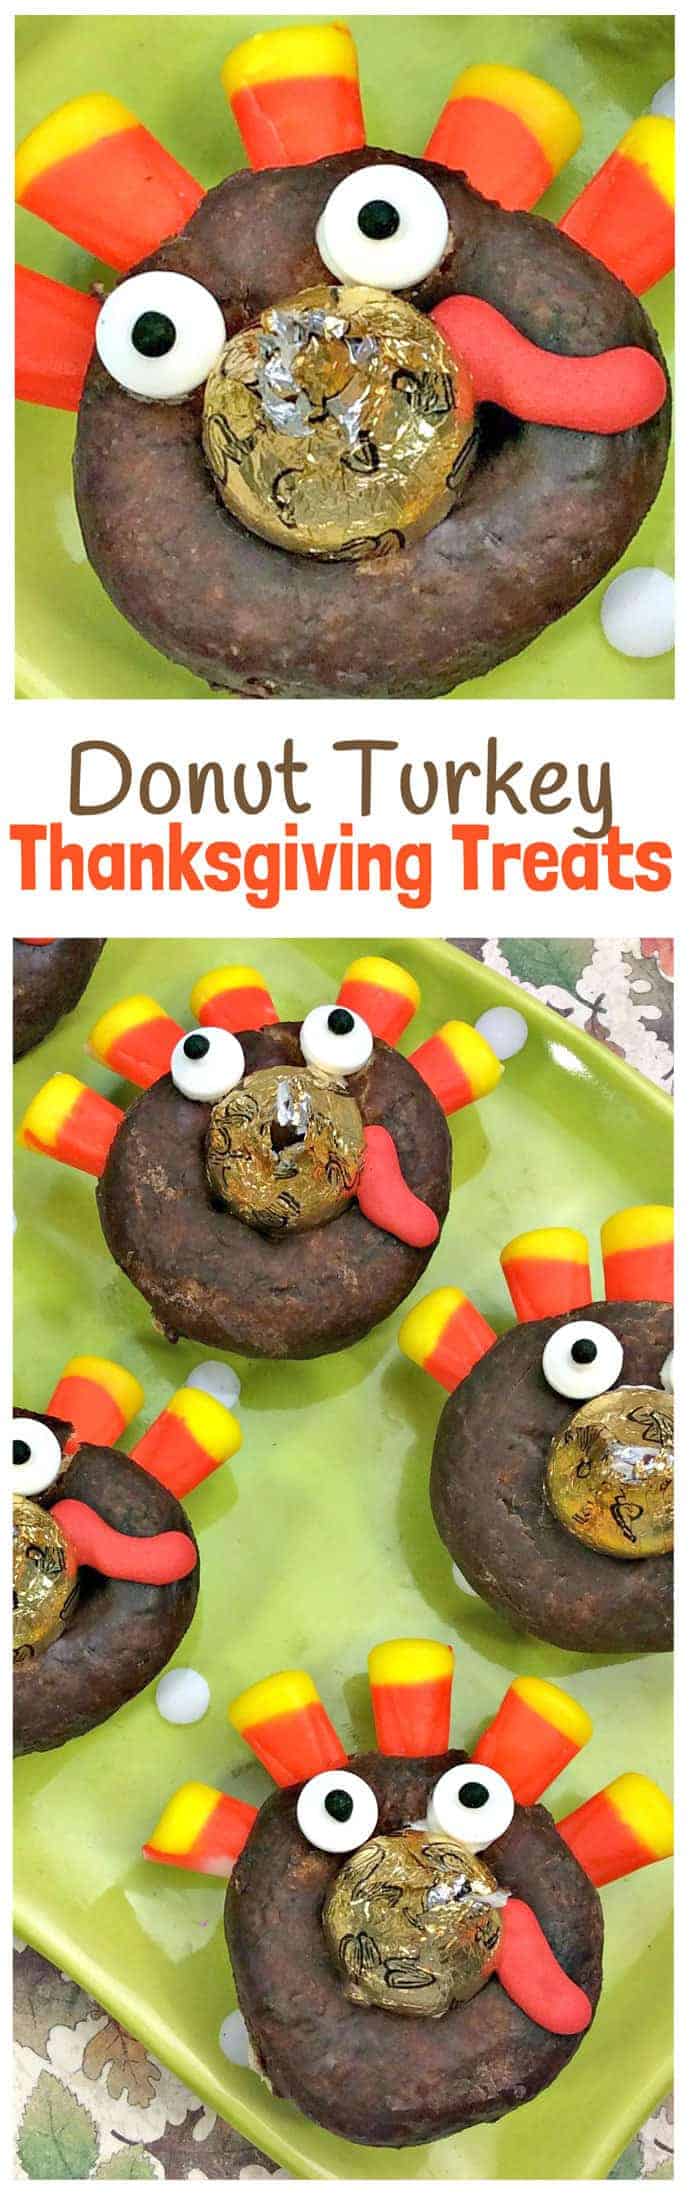 Donut Thanksgiving Turkey Treats are so fun for kids to make and eat. An easy no-cook Thanksgiving recipe that looks super cute and tastes delicious! 